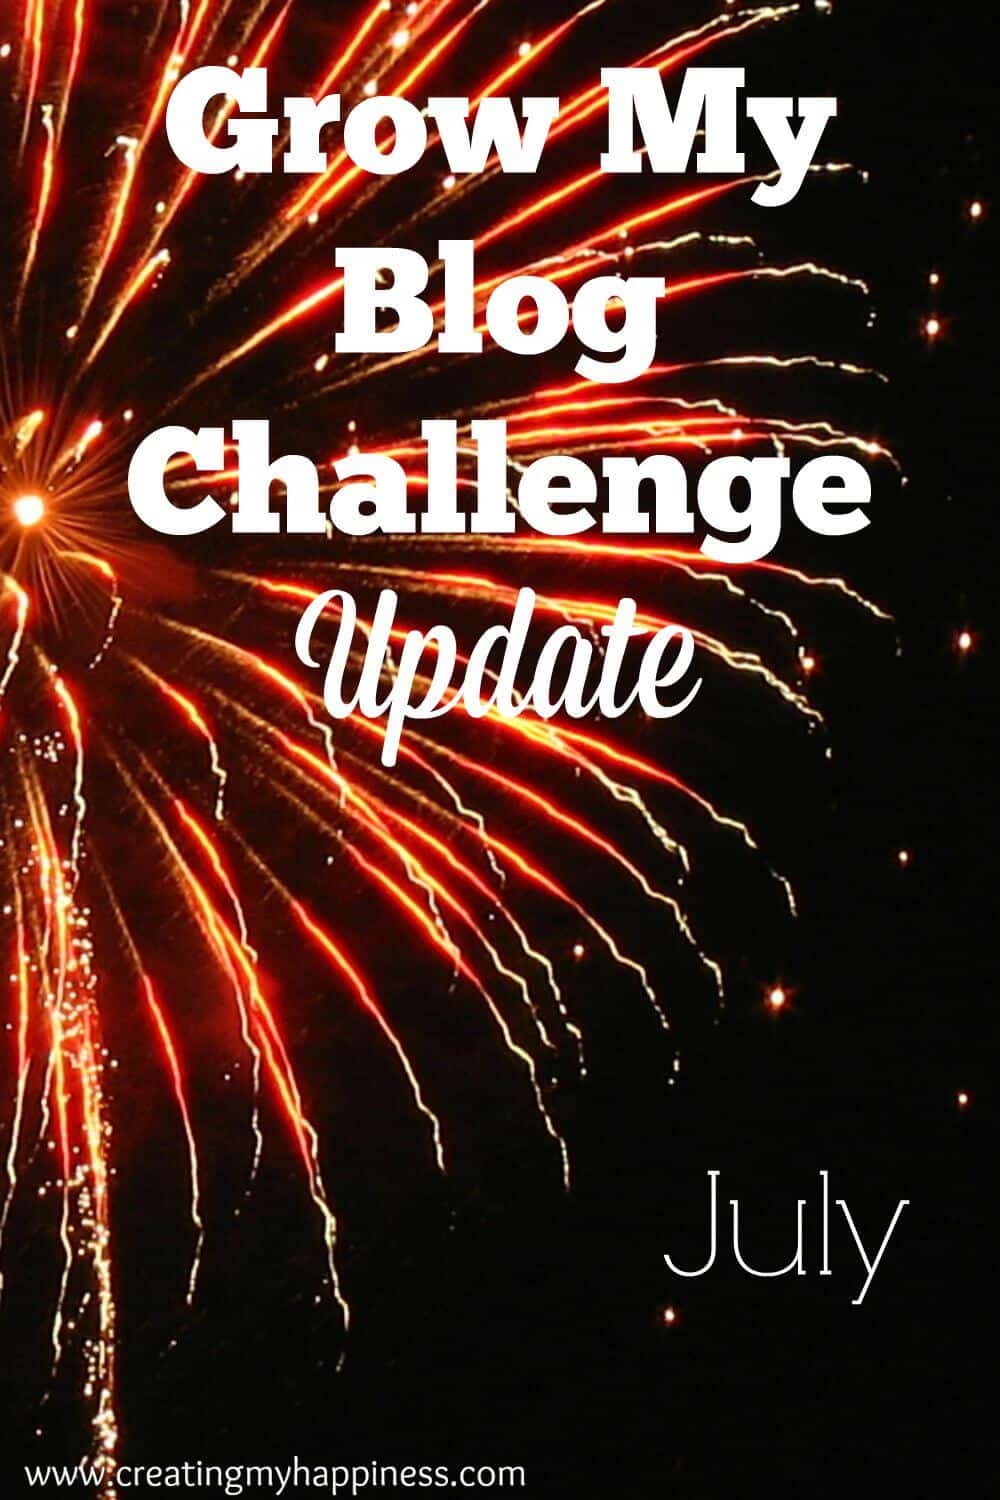 My monthly accountability post as part of the grow my blog challenge! All bloggers welcome to join!